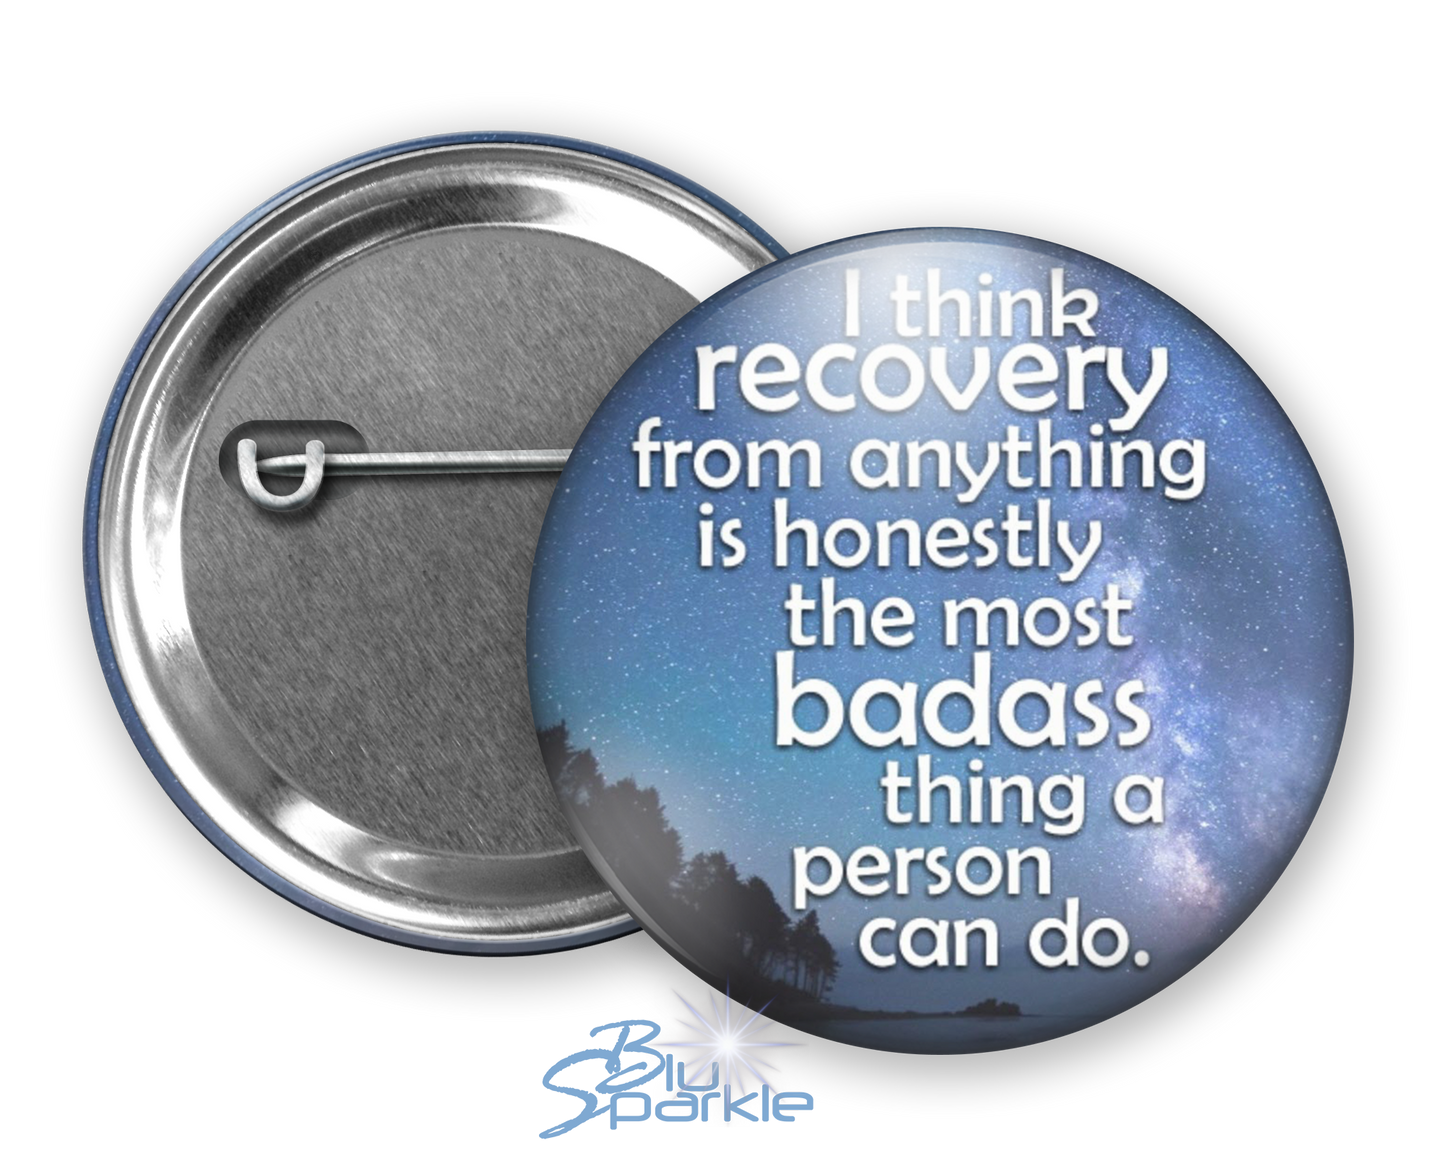 I Think Recovery From Anything Is Honestly The Most Badass Thing A Person Can Do - Pinback Buttons